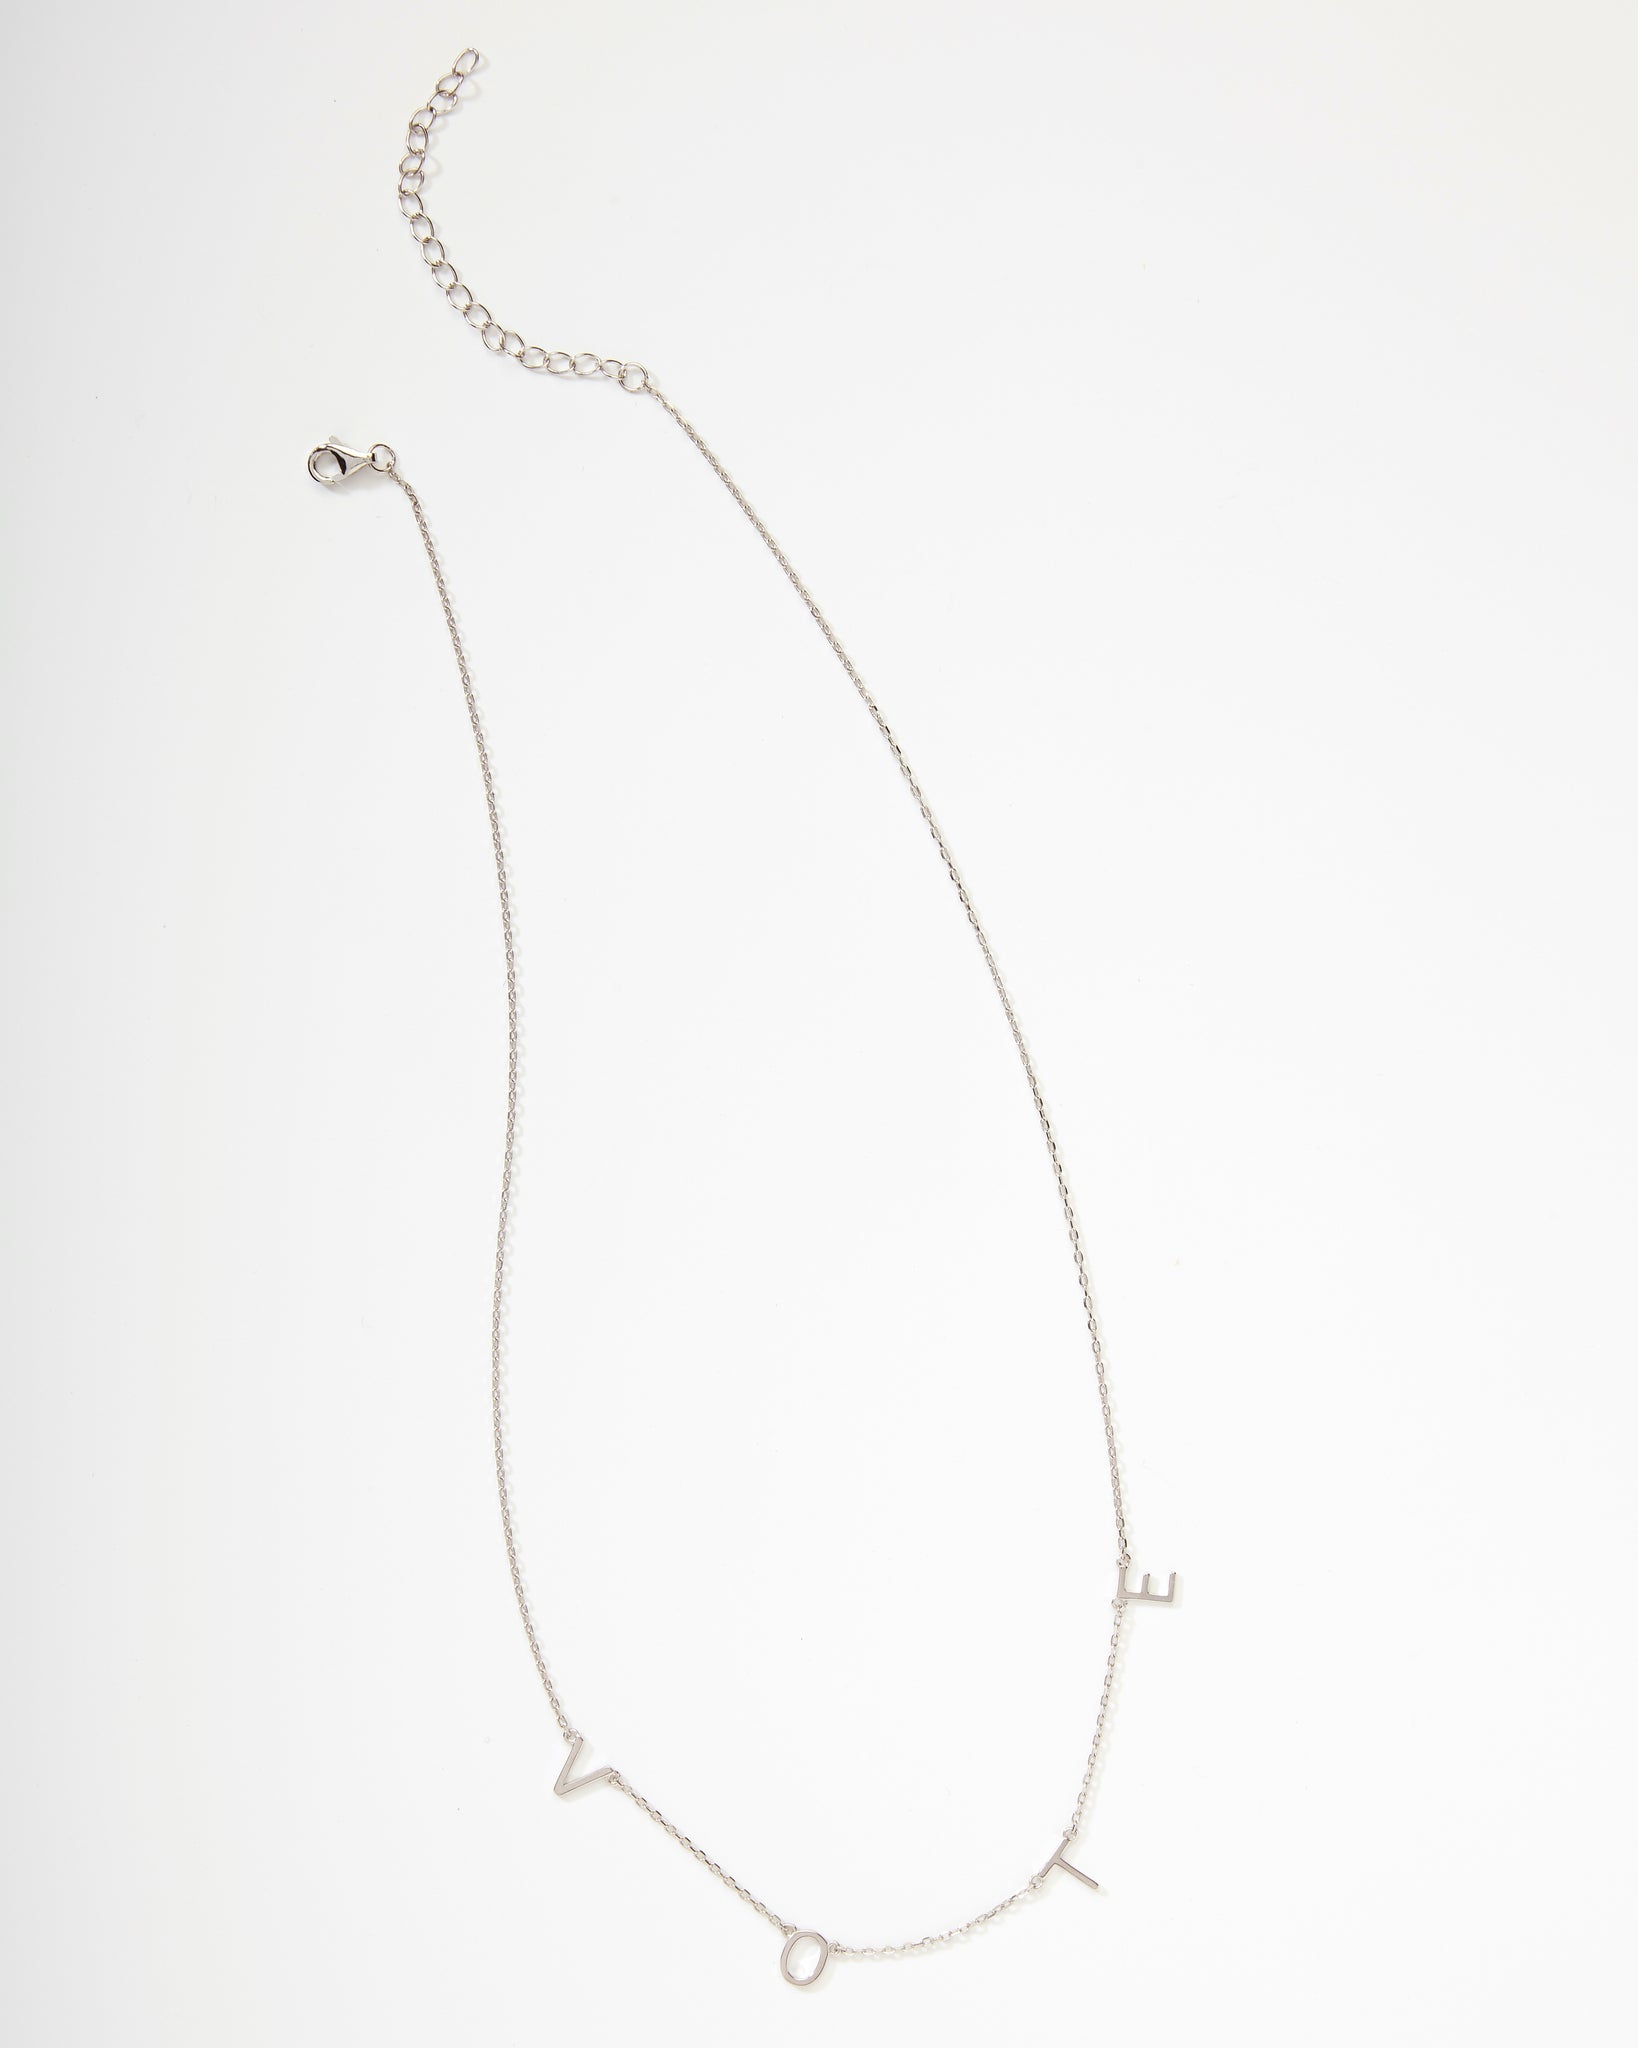 VOTE Necklace (Sterling Silver)